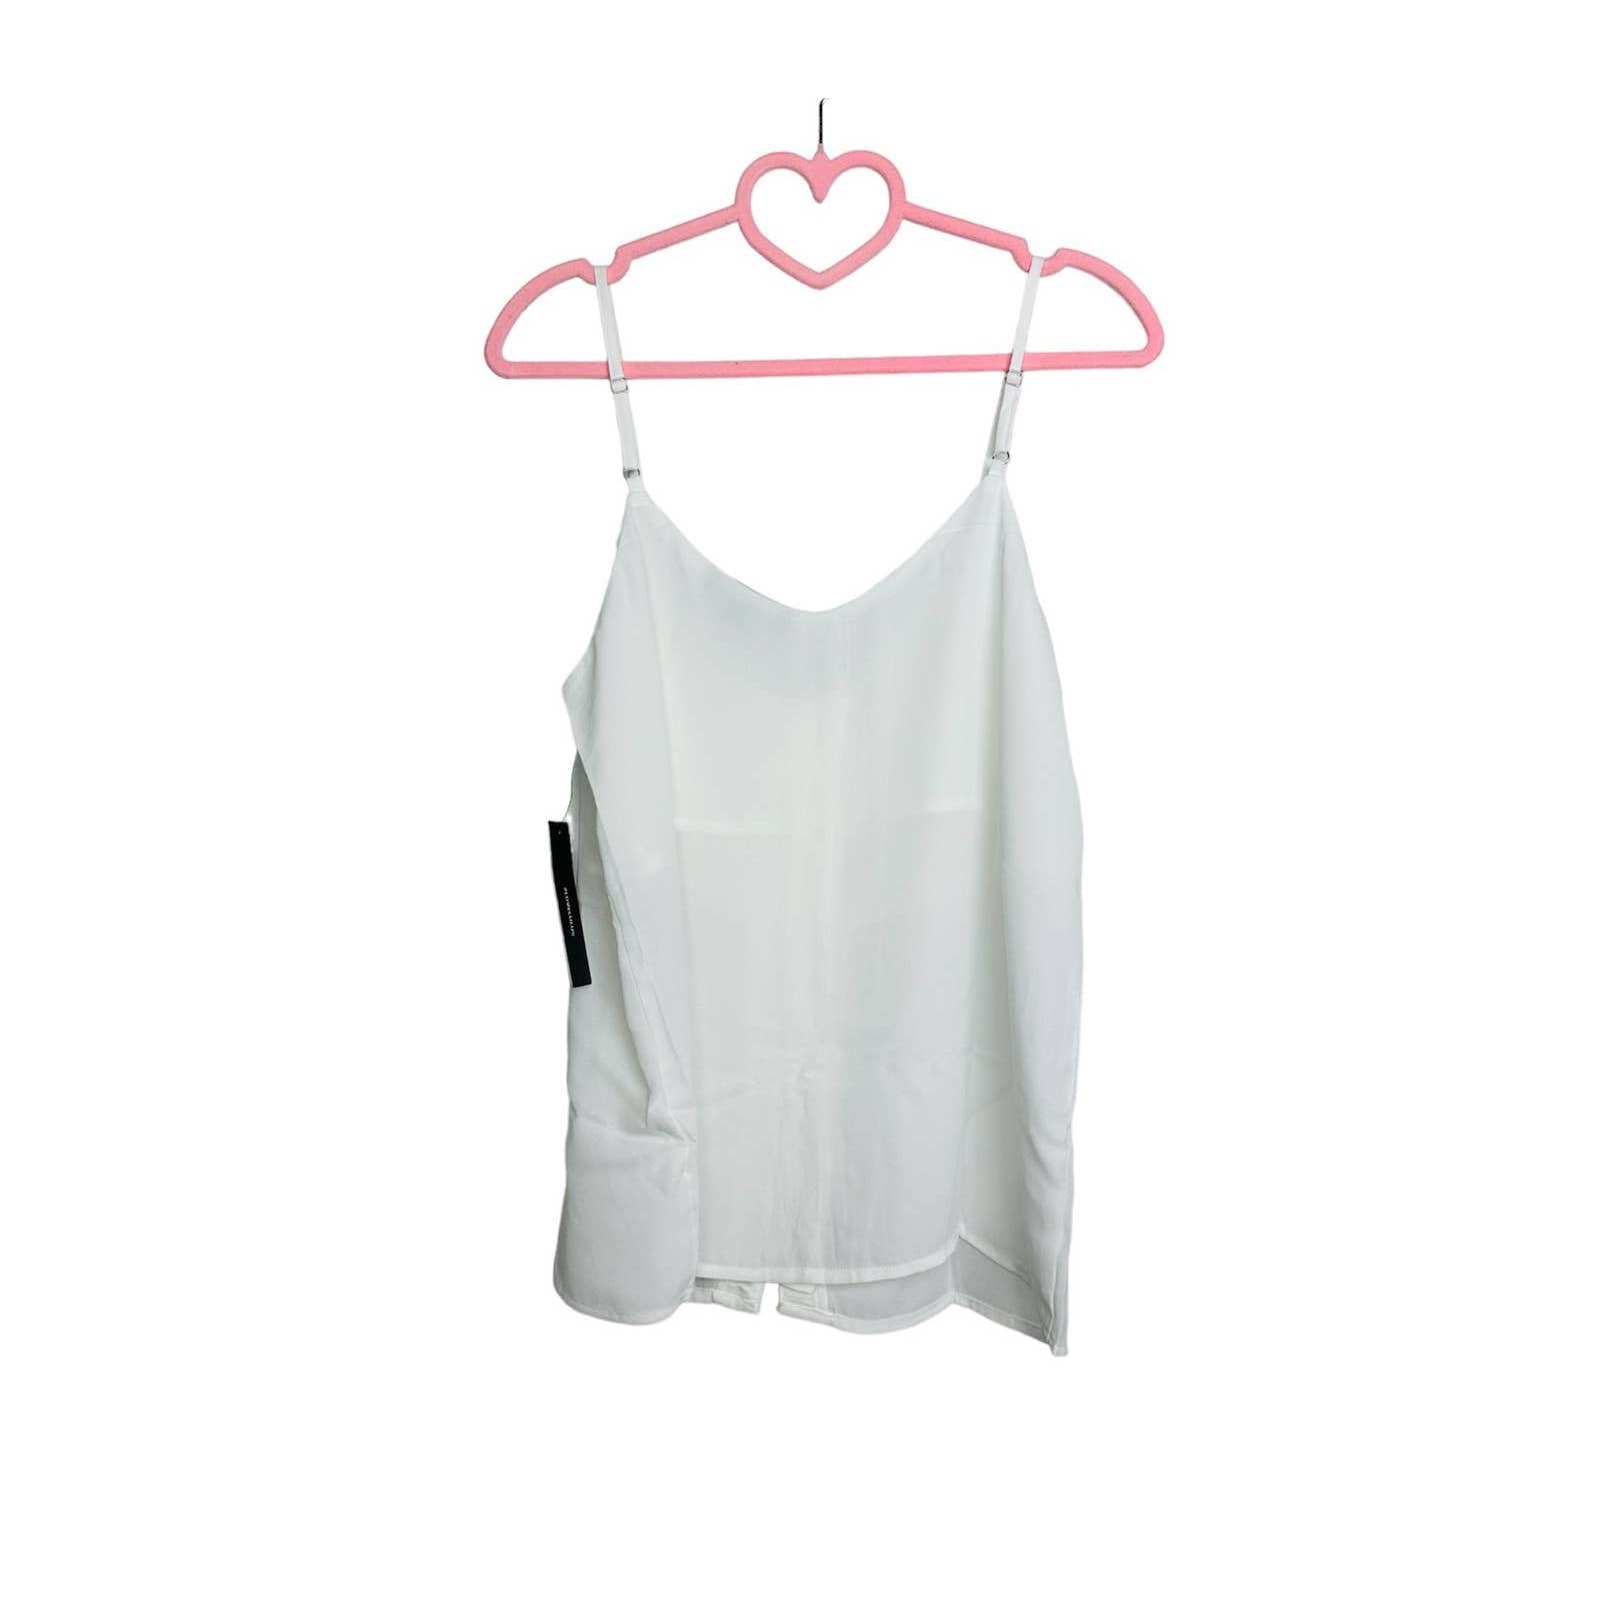 Lulus NWT Must Be Love Button-Front Woven Scoop Neck Cami Top White Size Small